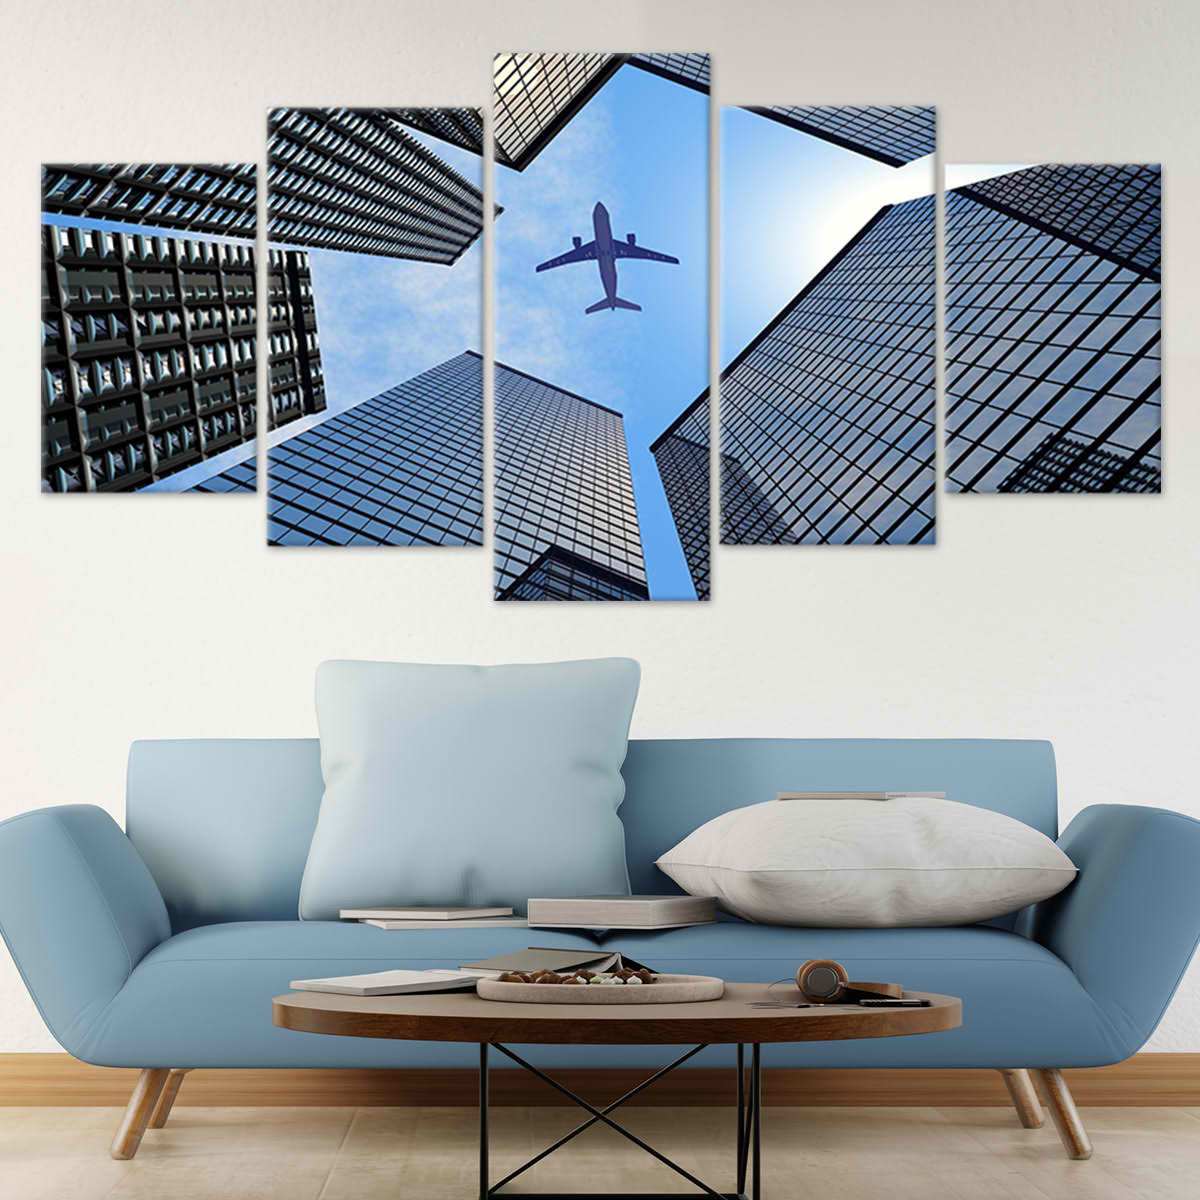 Airplane Flying Over Buildings Wall Art-Stunning Canvas Prints